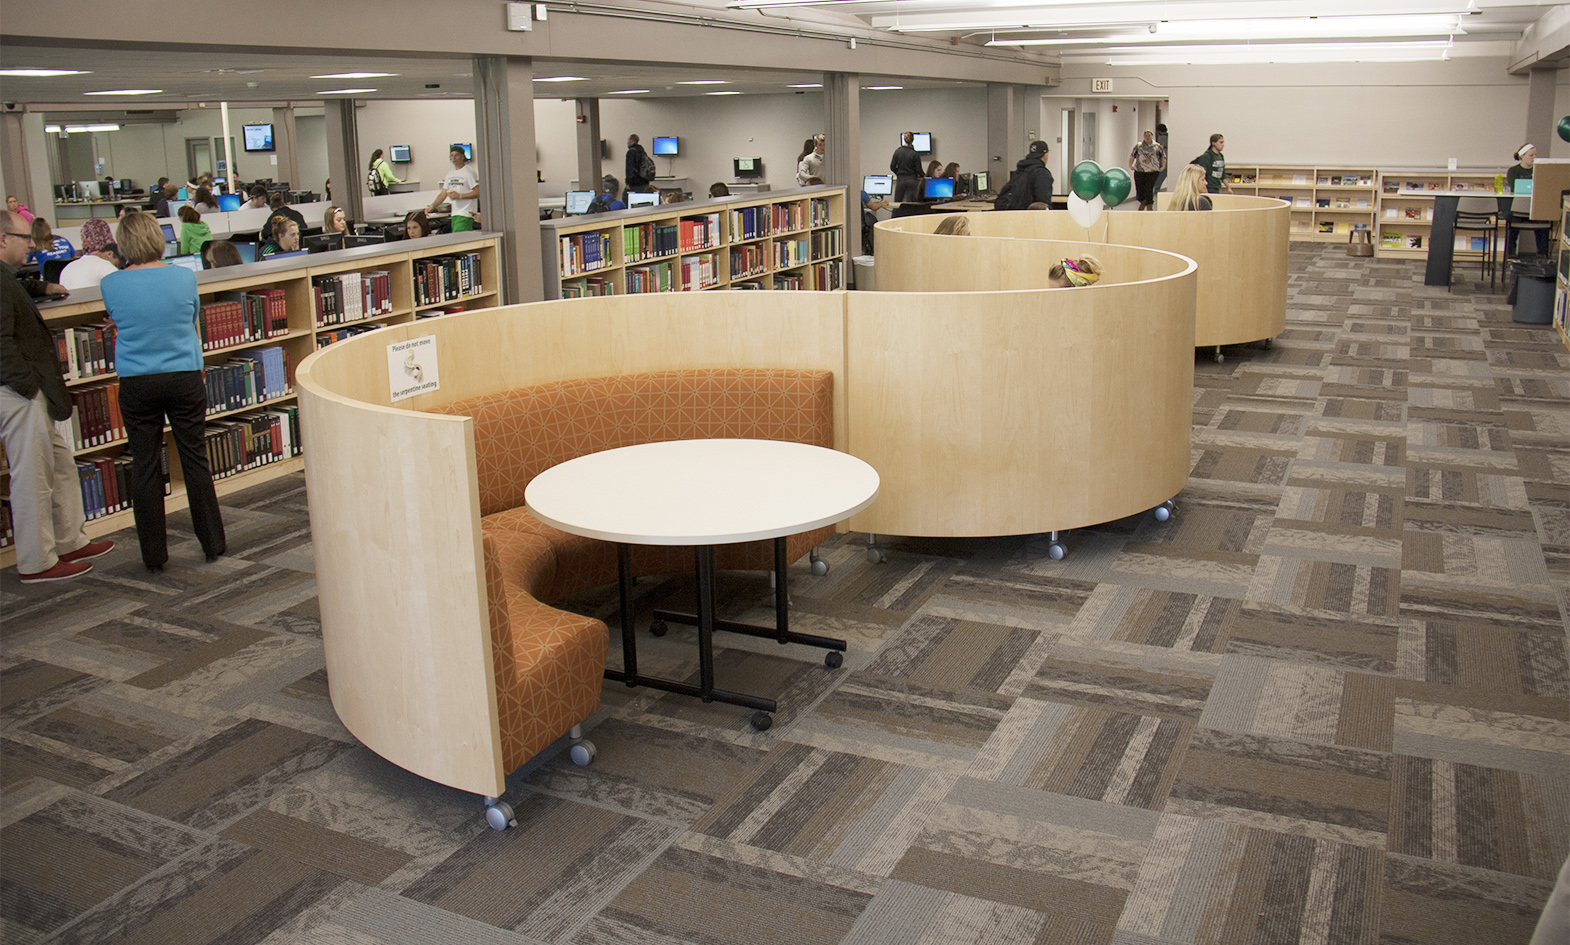 Curved banquette seating with wood privacy panels in serpentine design for collaboration at public library